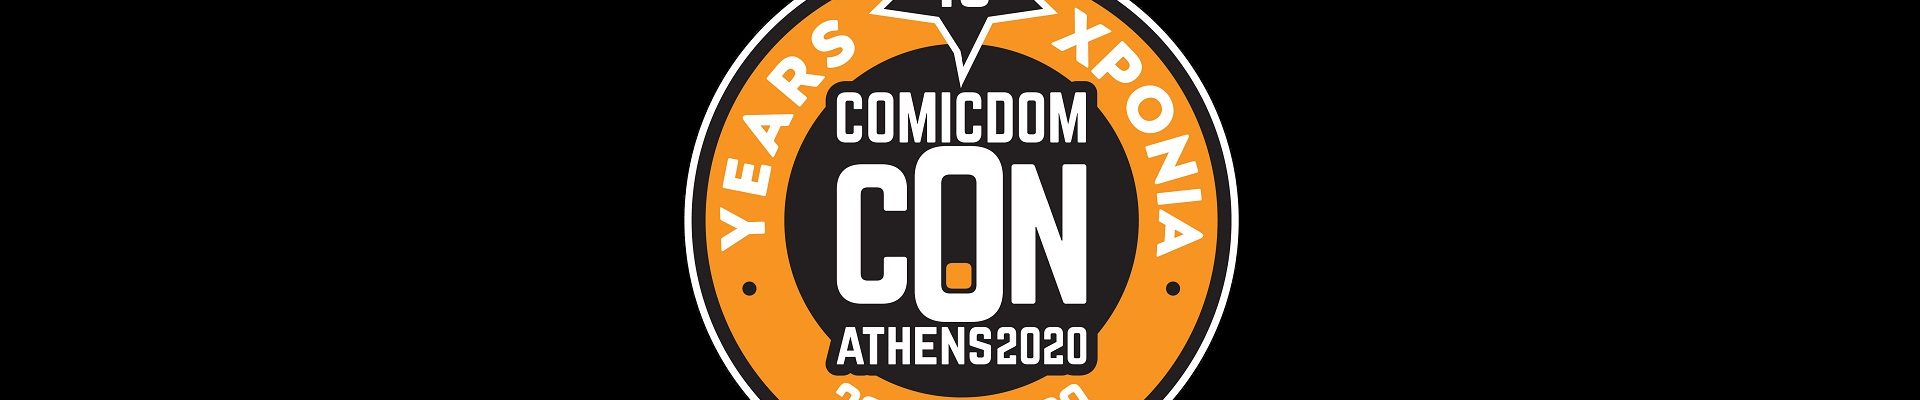 Comicdom Con Athens 2020 - And We Are Back